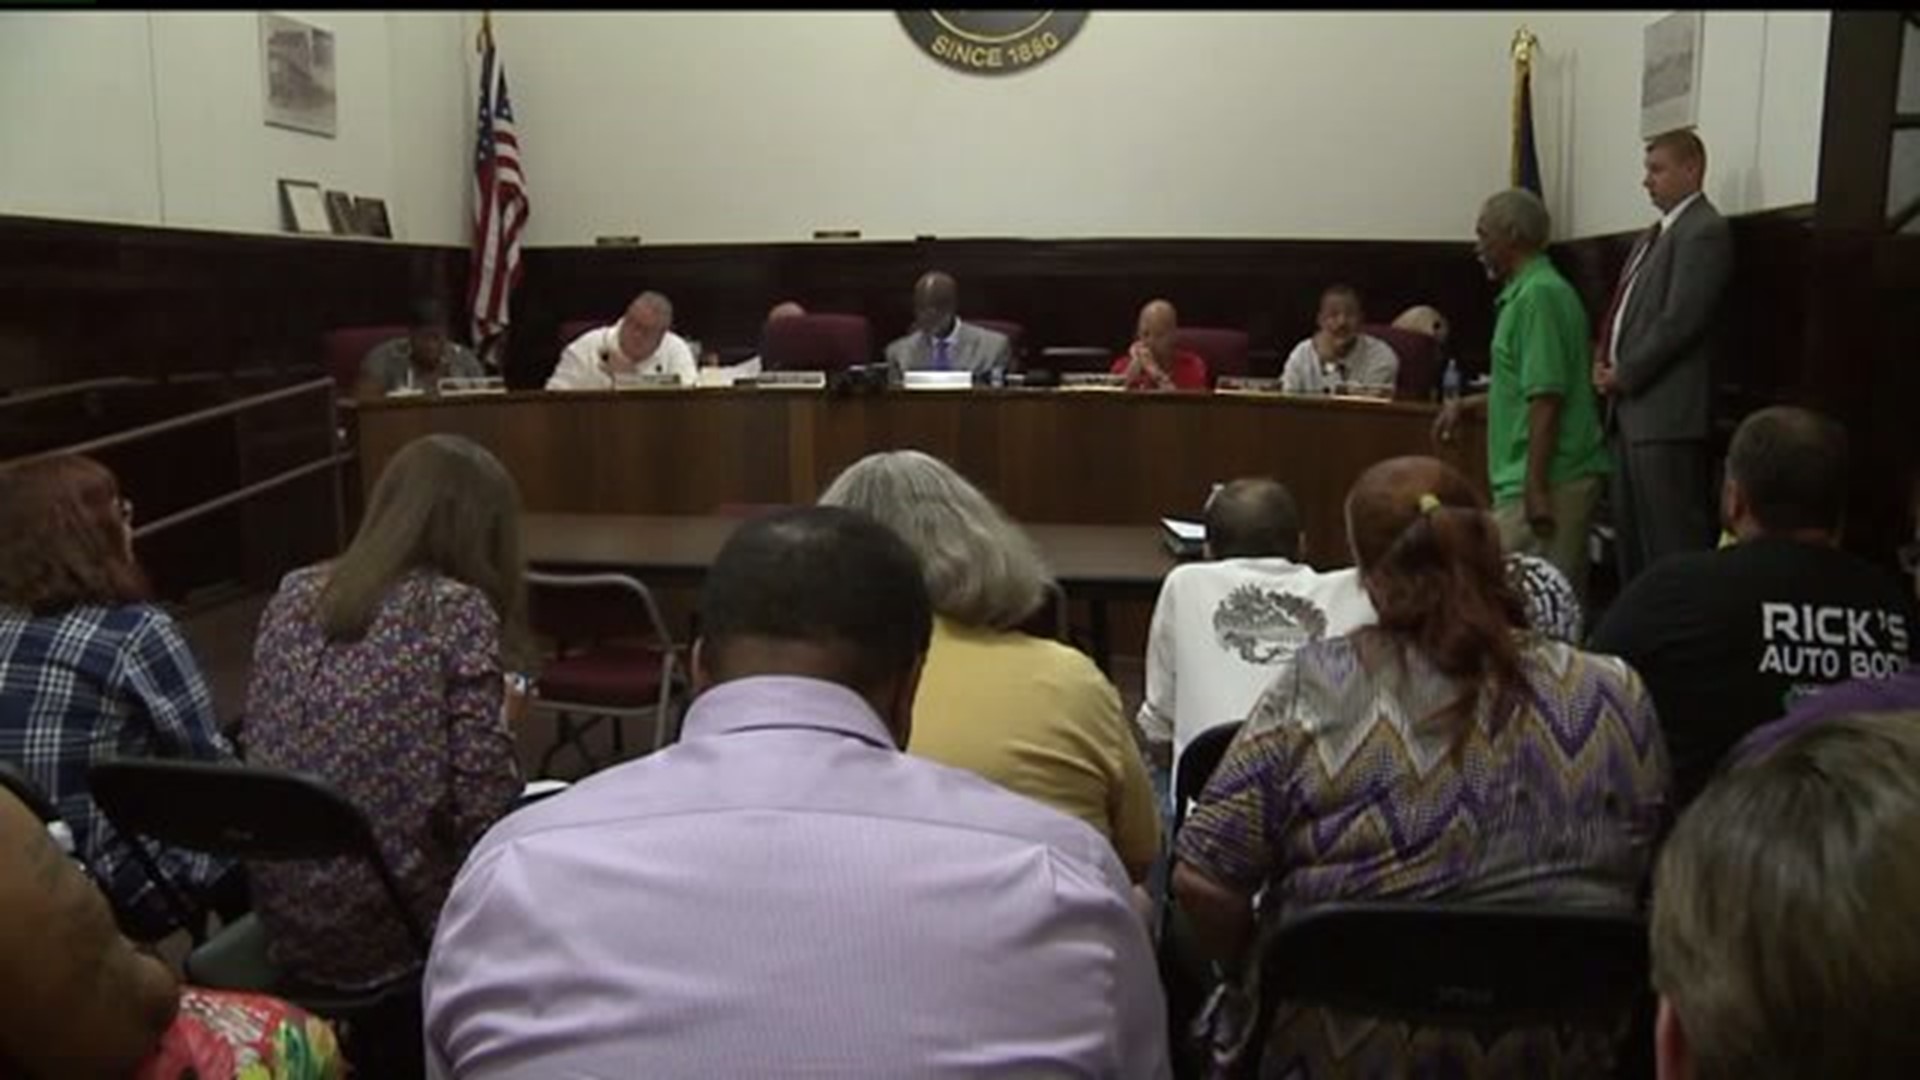 STEELTON MEETING ABOUT CODES VIOLATIONS